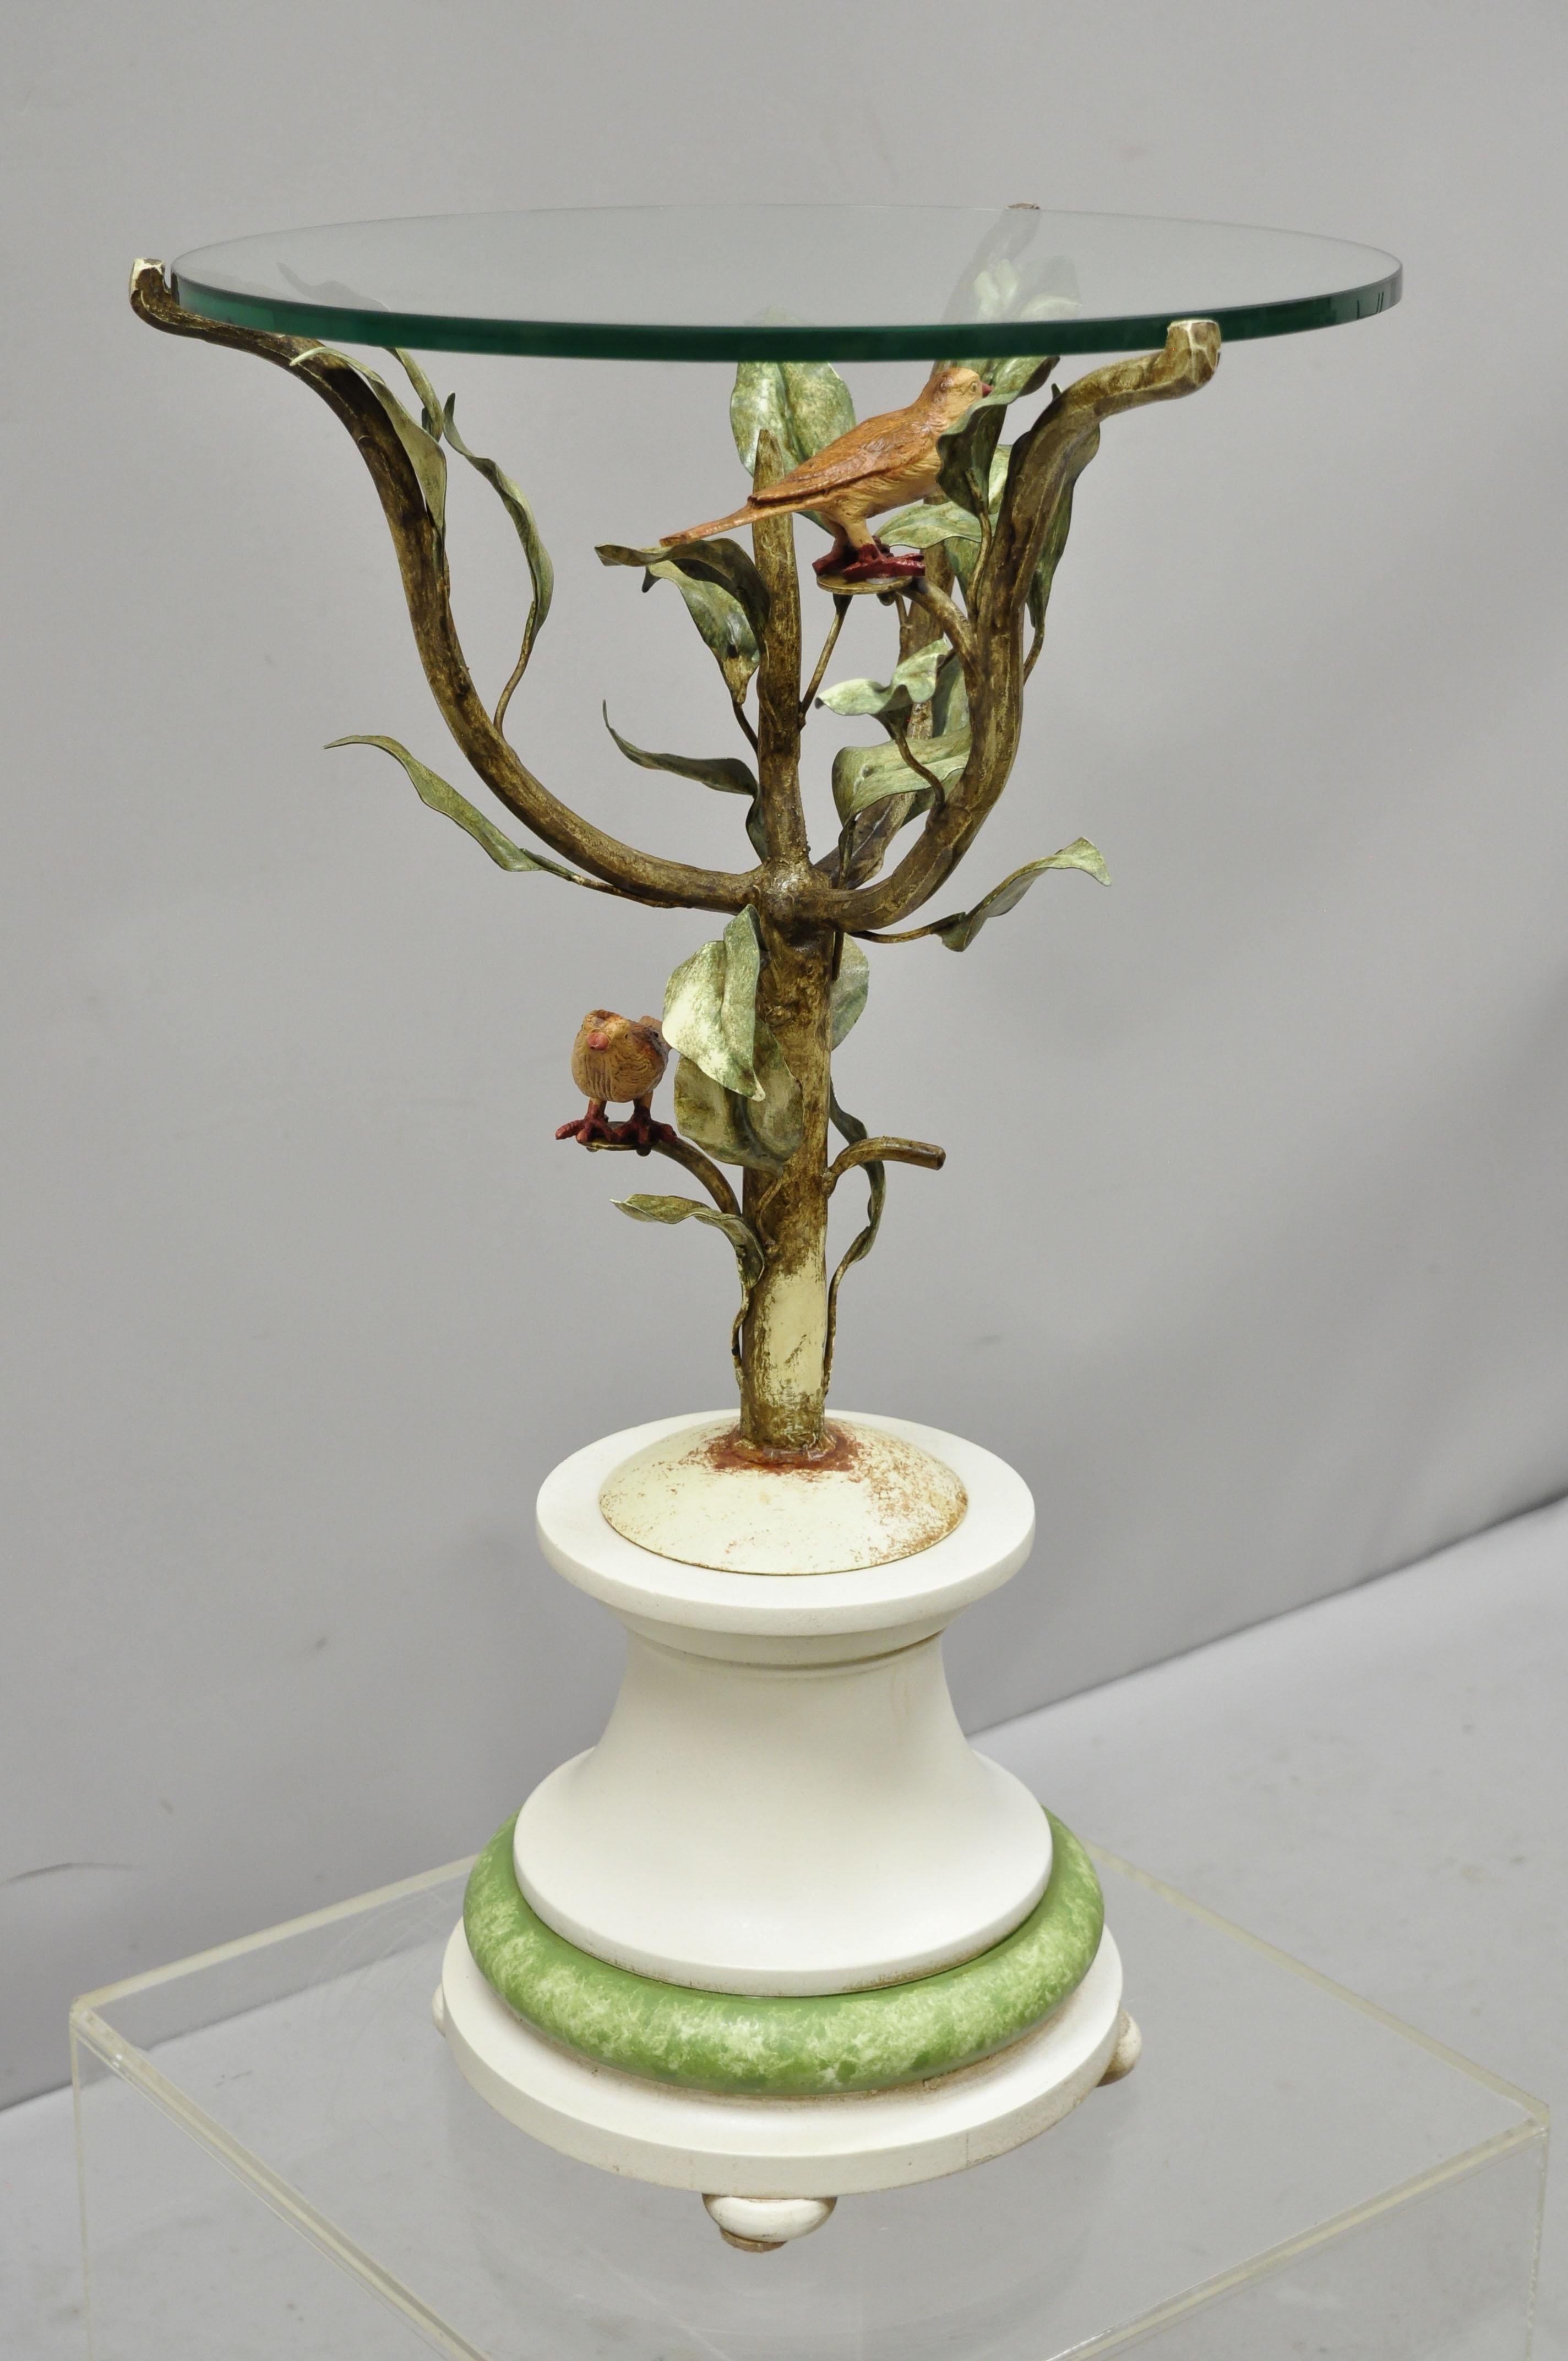 Vintage Italian toleware bird and tree round glass top accent side table. Item features iron toleware painted tree form base with birds, wooden base, round glass top, great style and form, circa mid-20th century. Measurements: 26